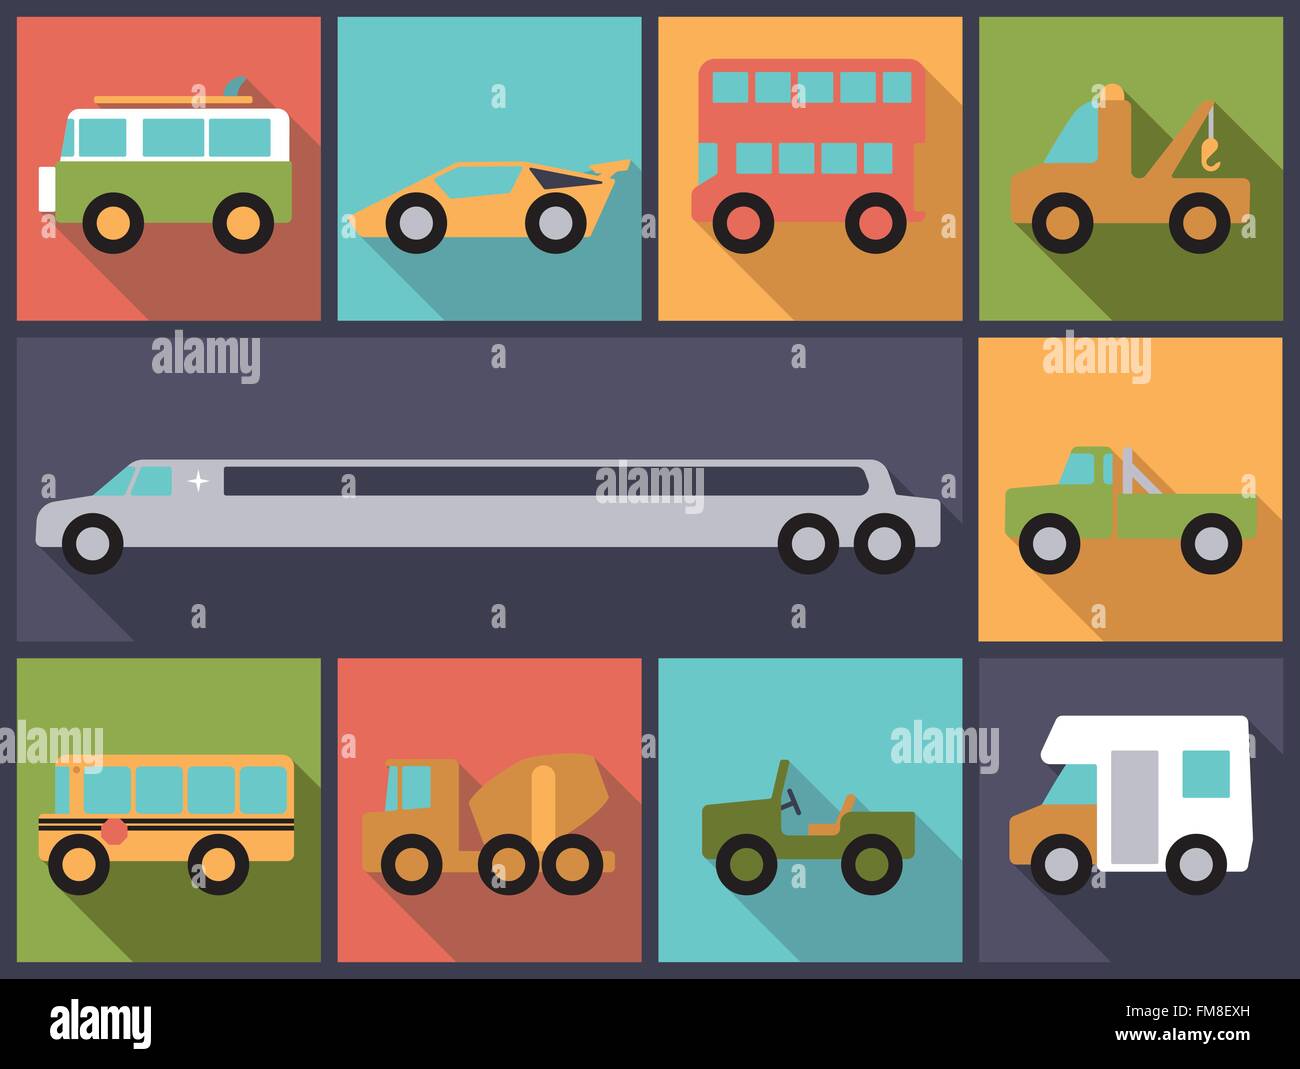 Flat design illustration with various cars, trucks, buses and vans Stock Vector